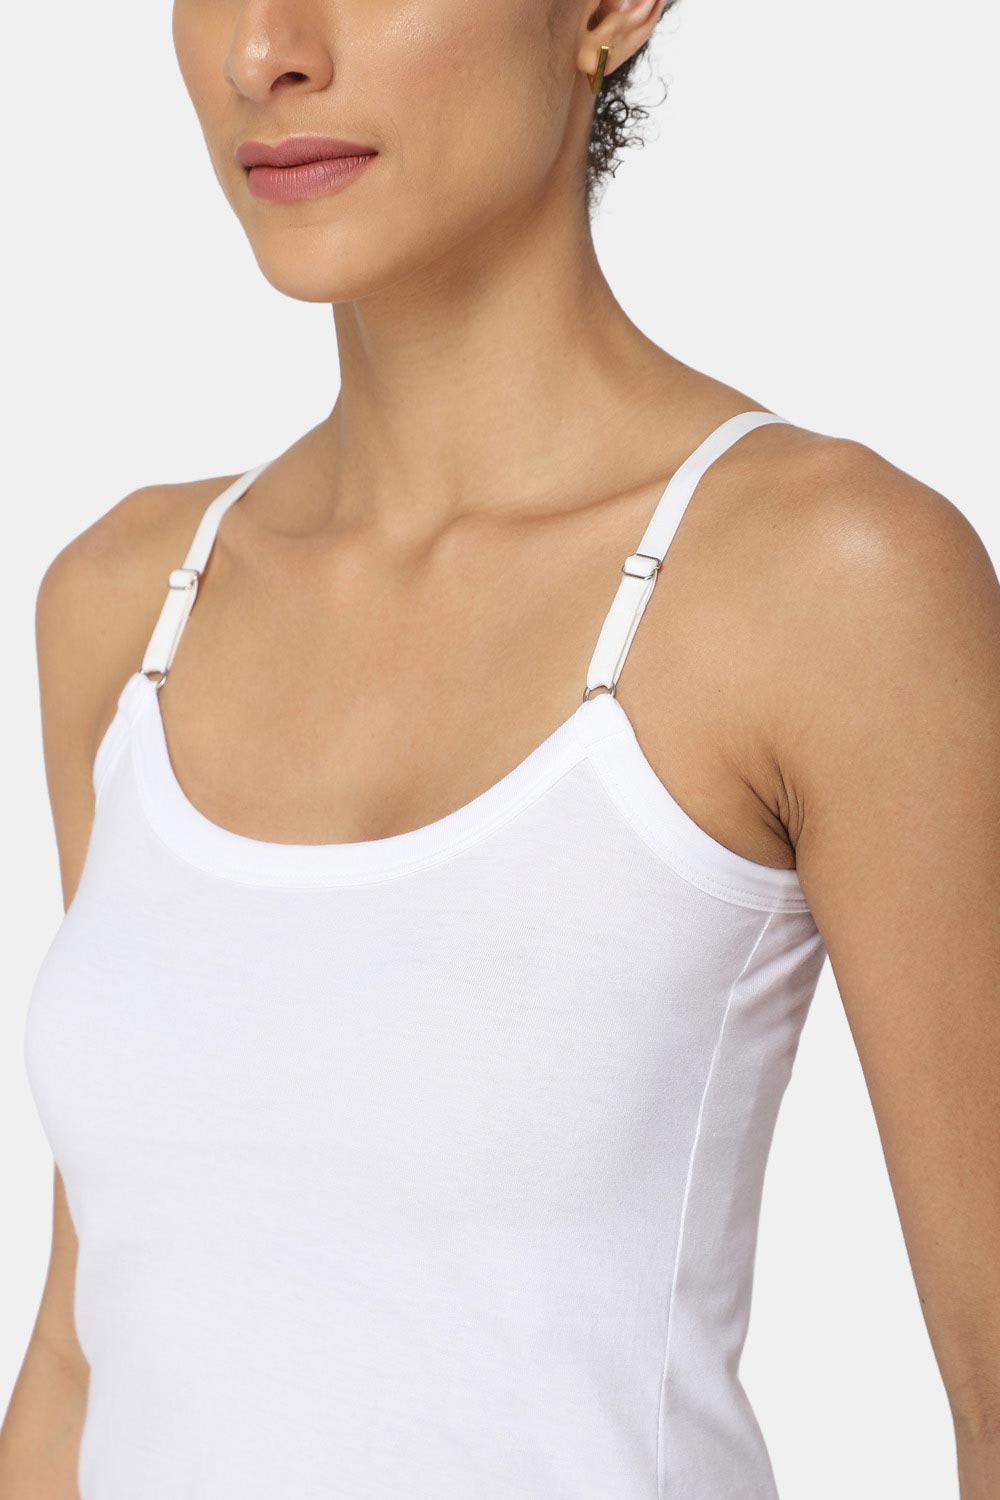 Intimacy Camisole-Slip Special Combo Pack - In05 - Pack of 3 - C63